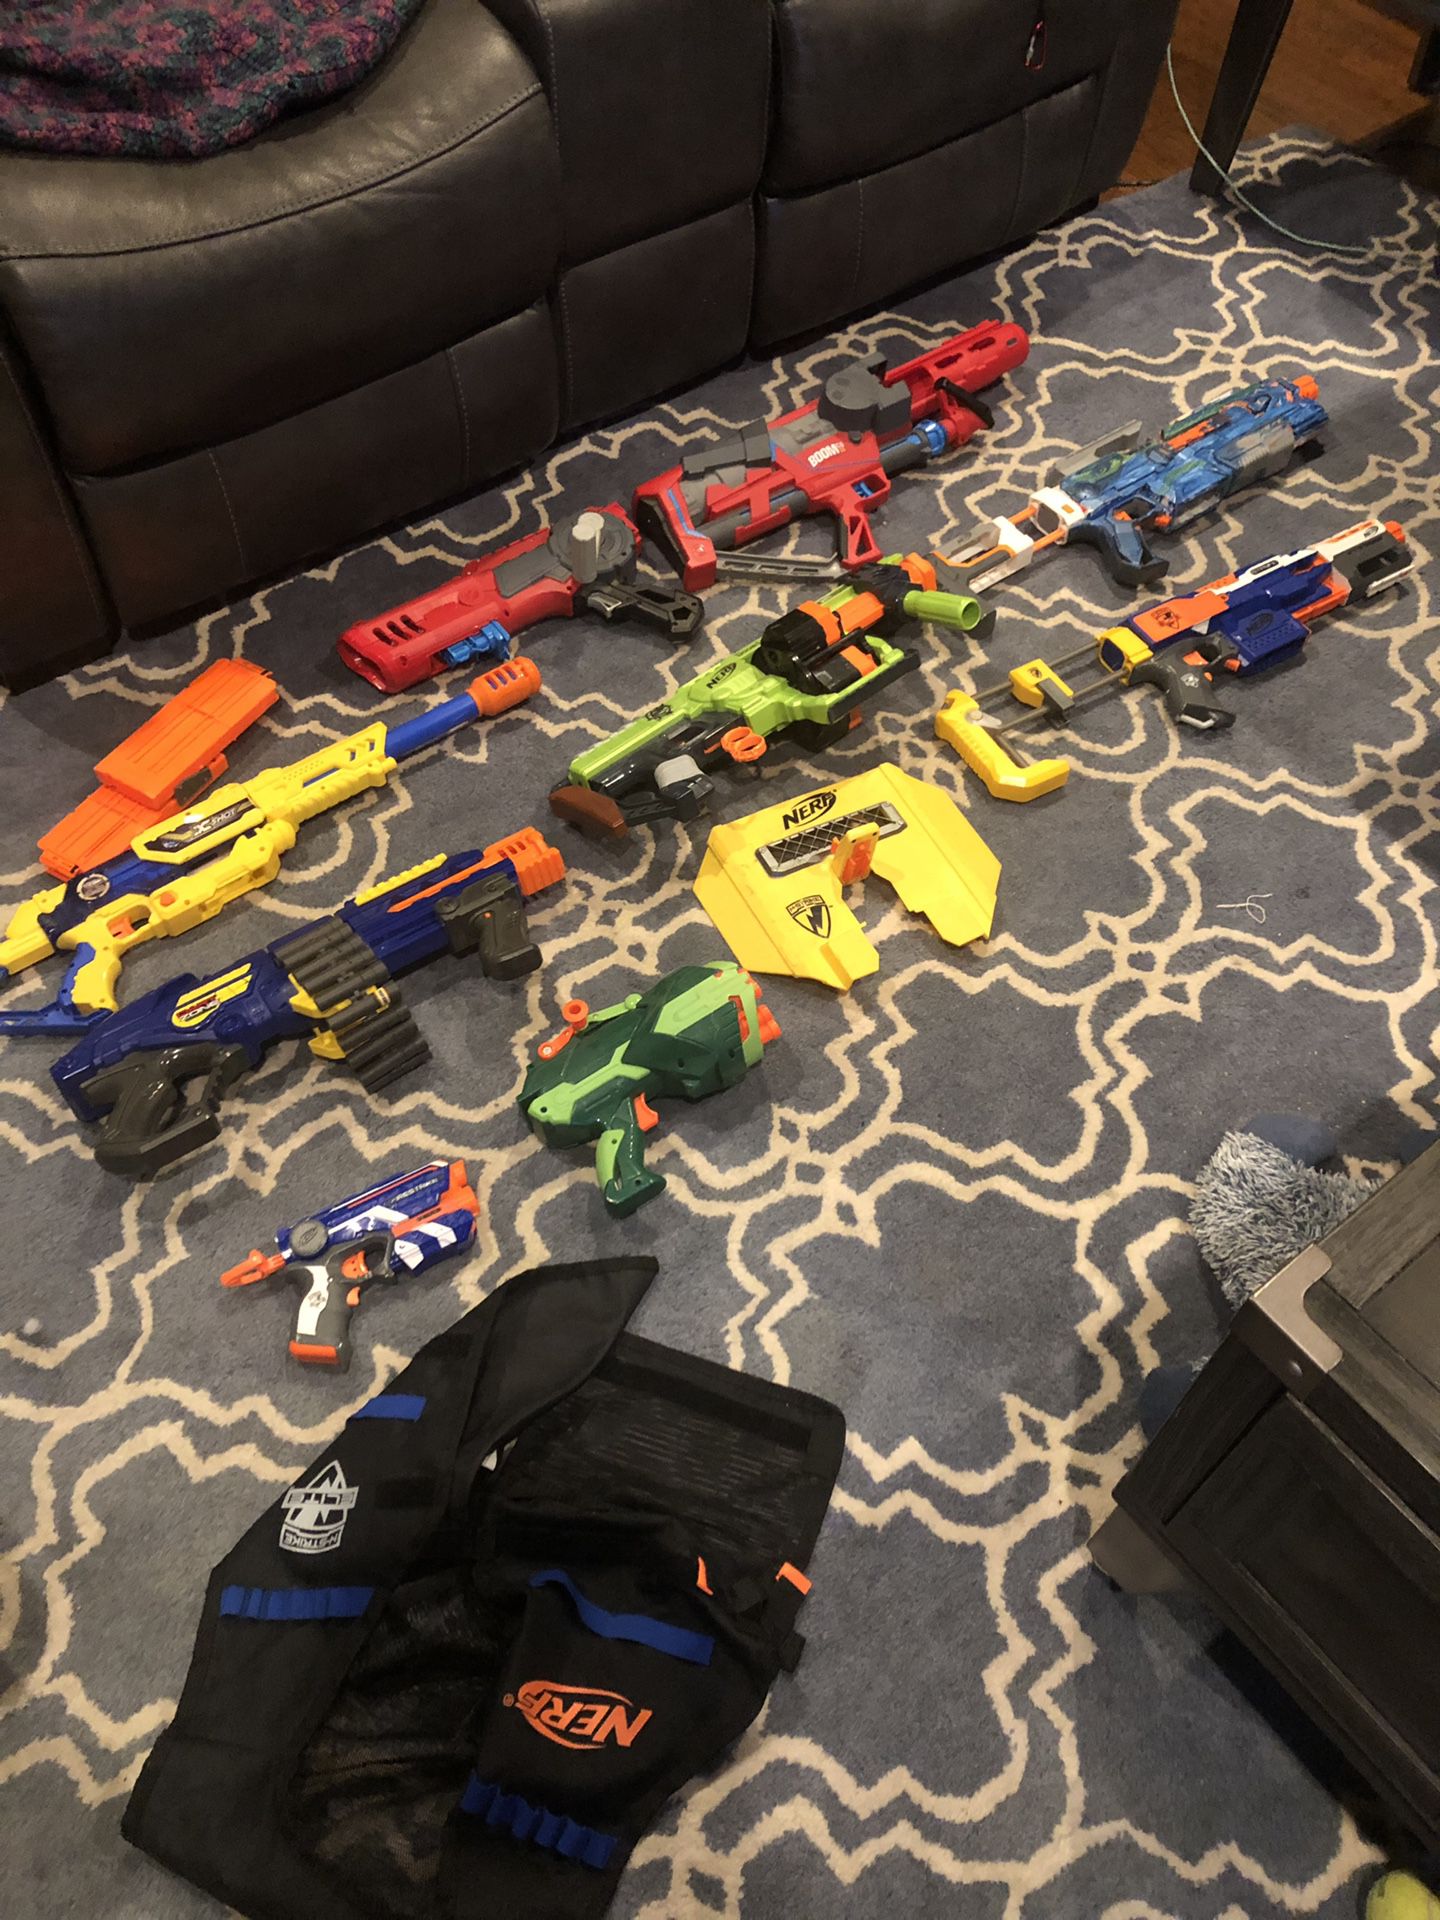 Multiple nerf guns for sale. If you know nerf, you know these are pretty expensive...will sell all for $200.